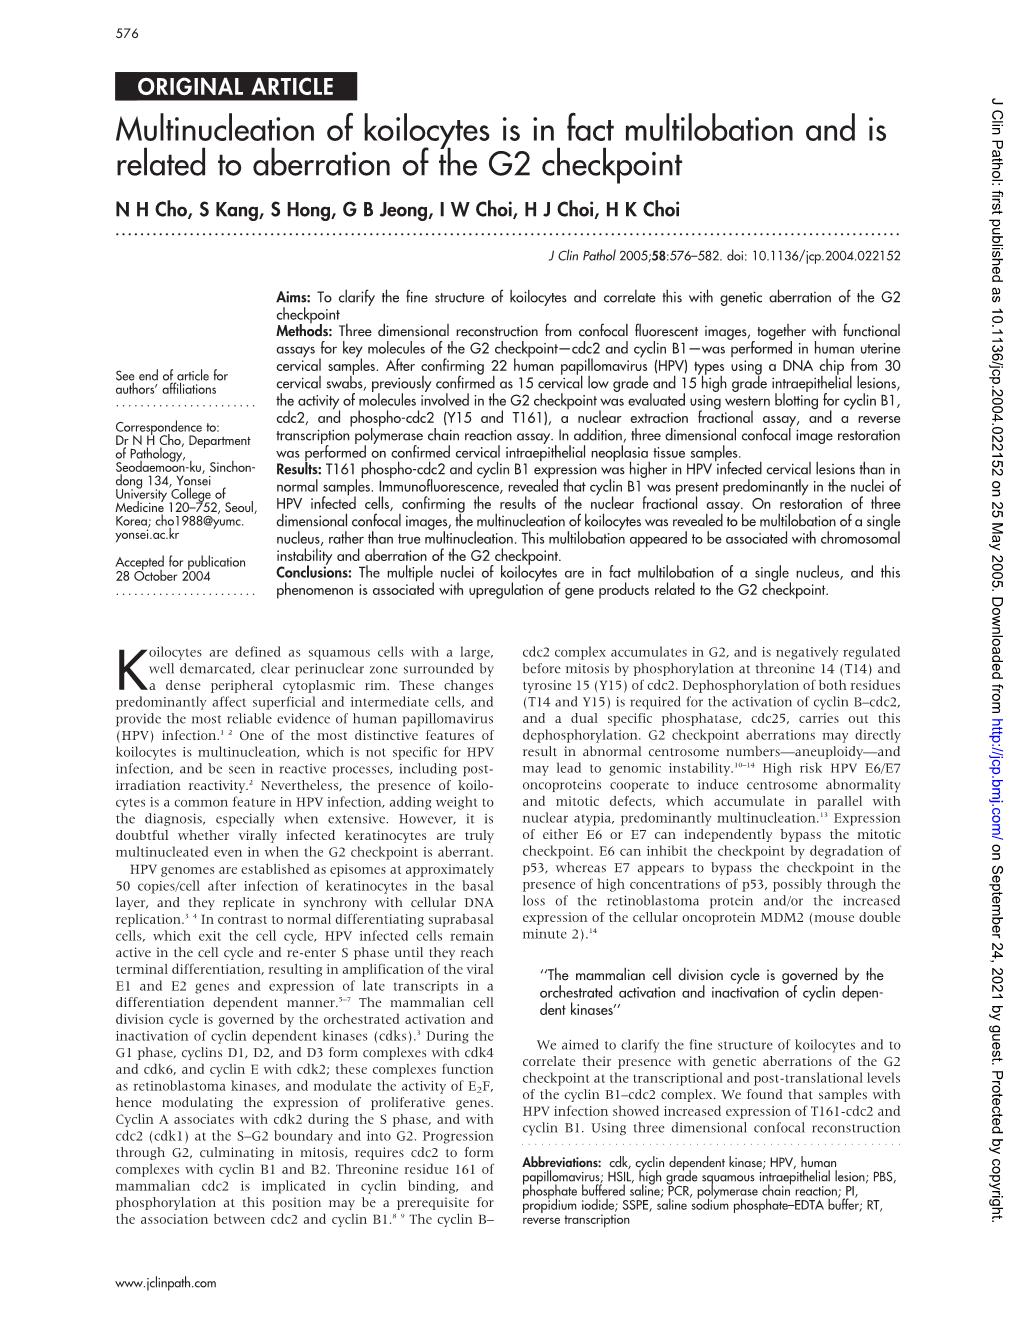 Multinucleation of Koilocytes Is in Fact Multilobation and Is Related to Aberration of the G2 Checkpoint